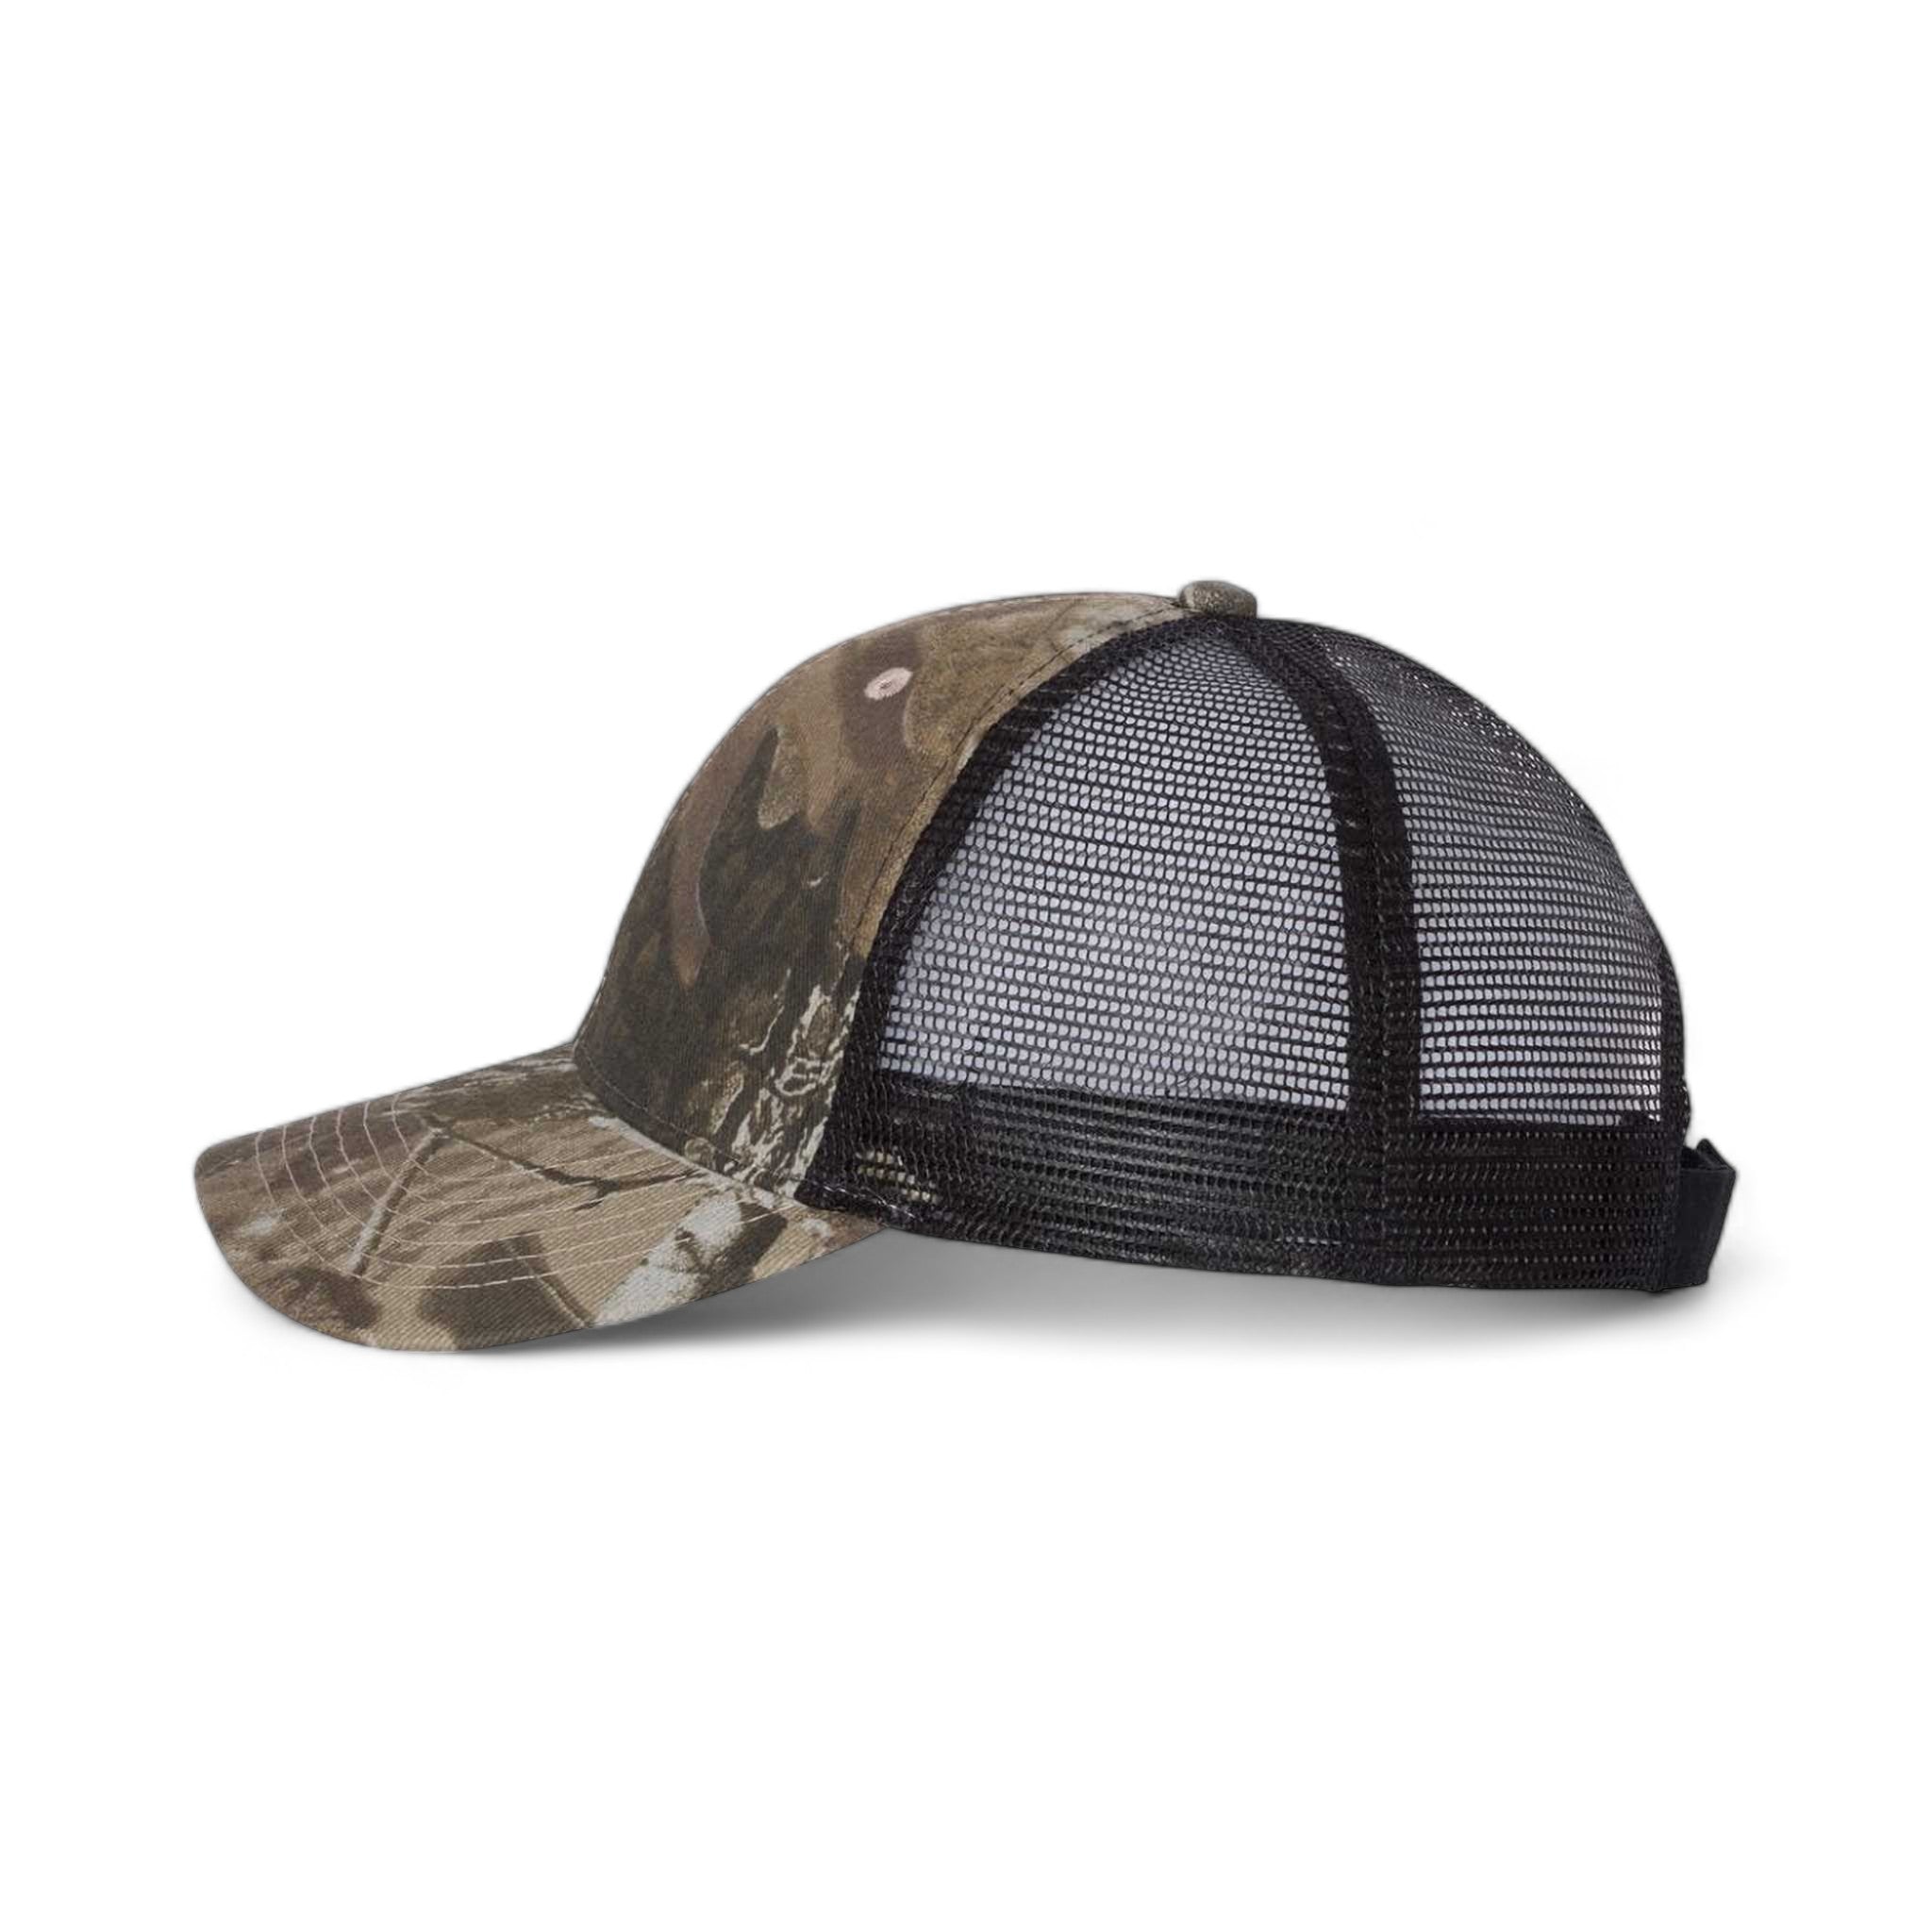 Side view of Kati LC5M custom hat in realtree hardwoods and black